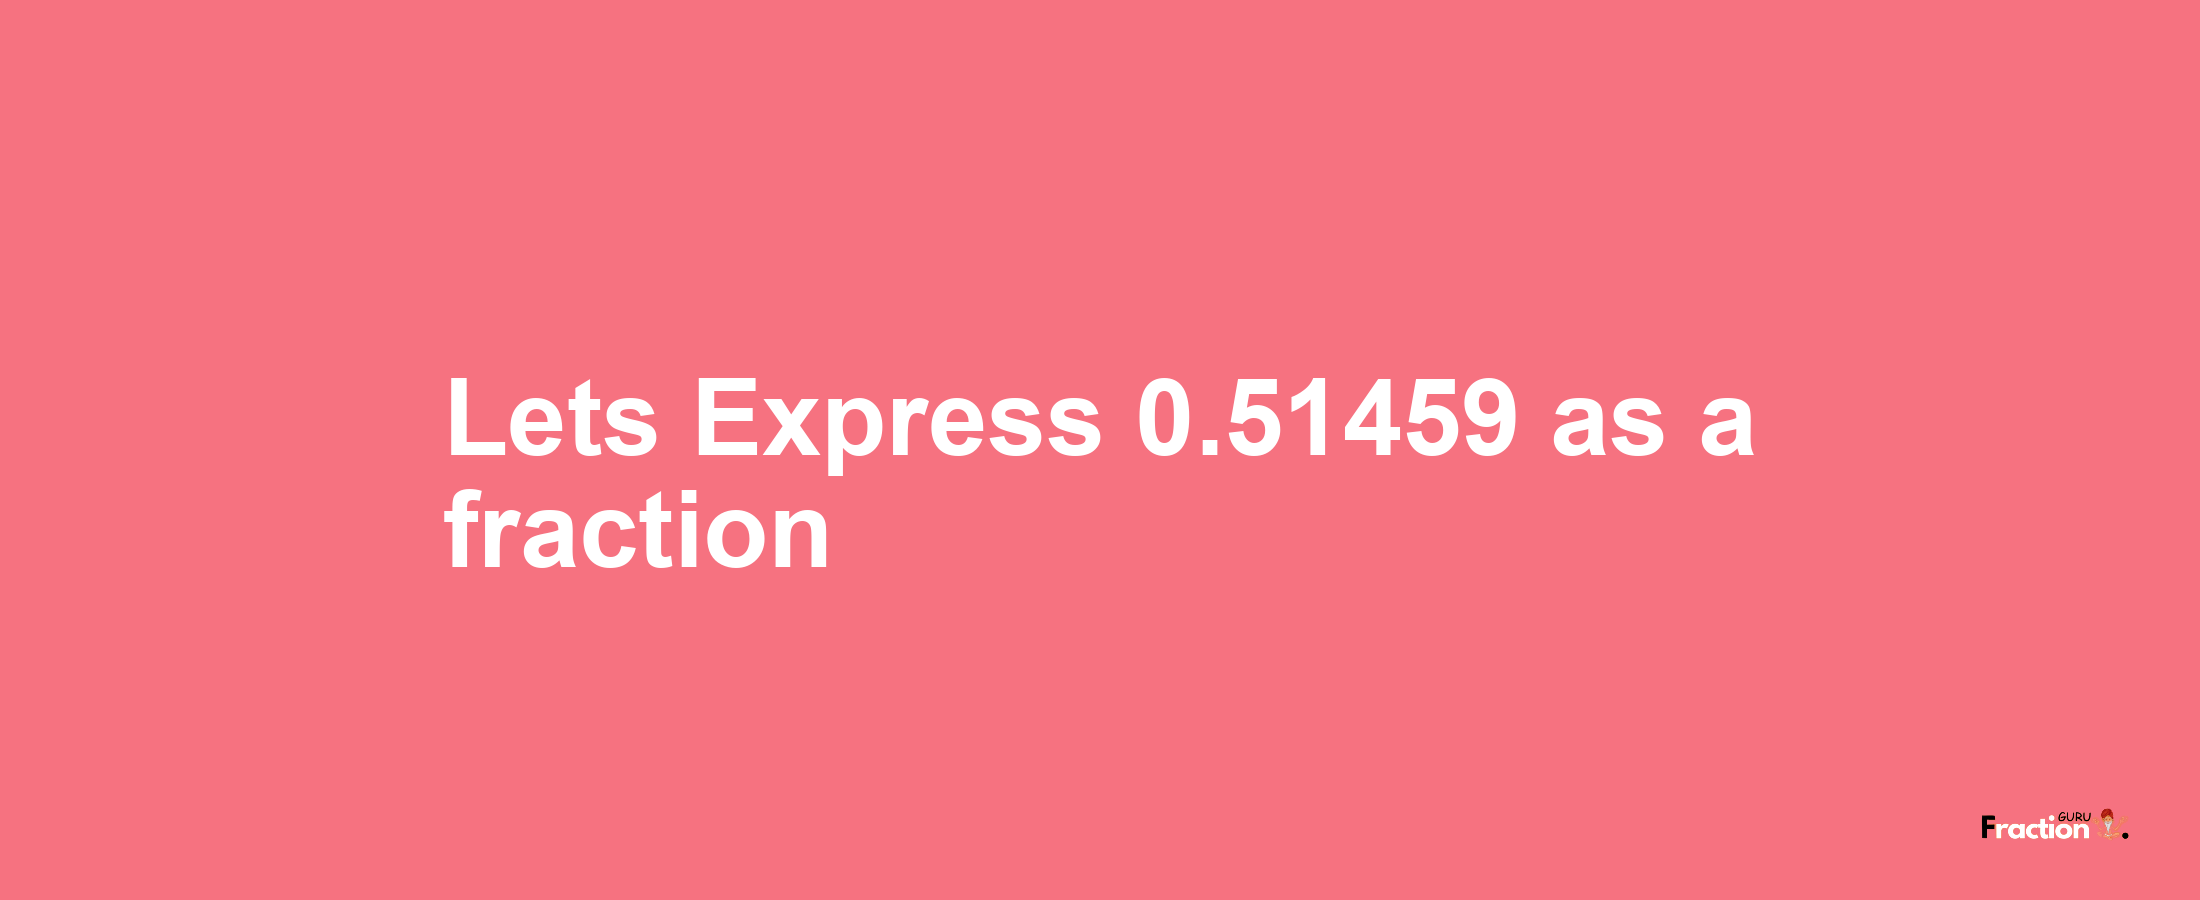 Lets Express 0.51459 as afraction